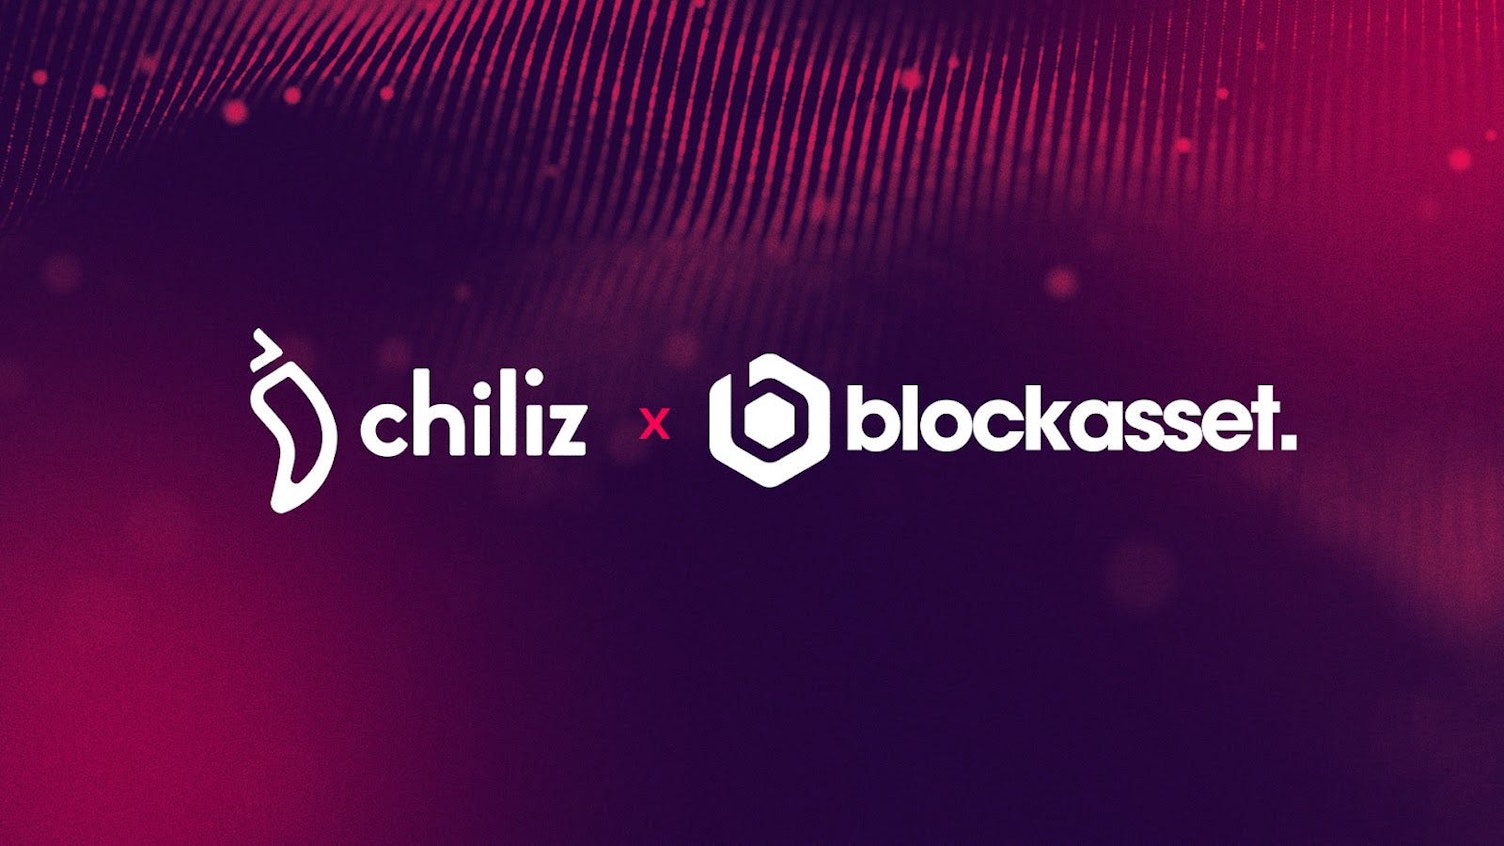 The agreement will see Blockasset operate cross-chain on Chiliz Chain 2.0 and Solana, whilst Chiliz make an equity investment to Blockasset.